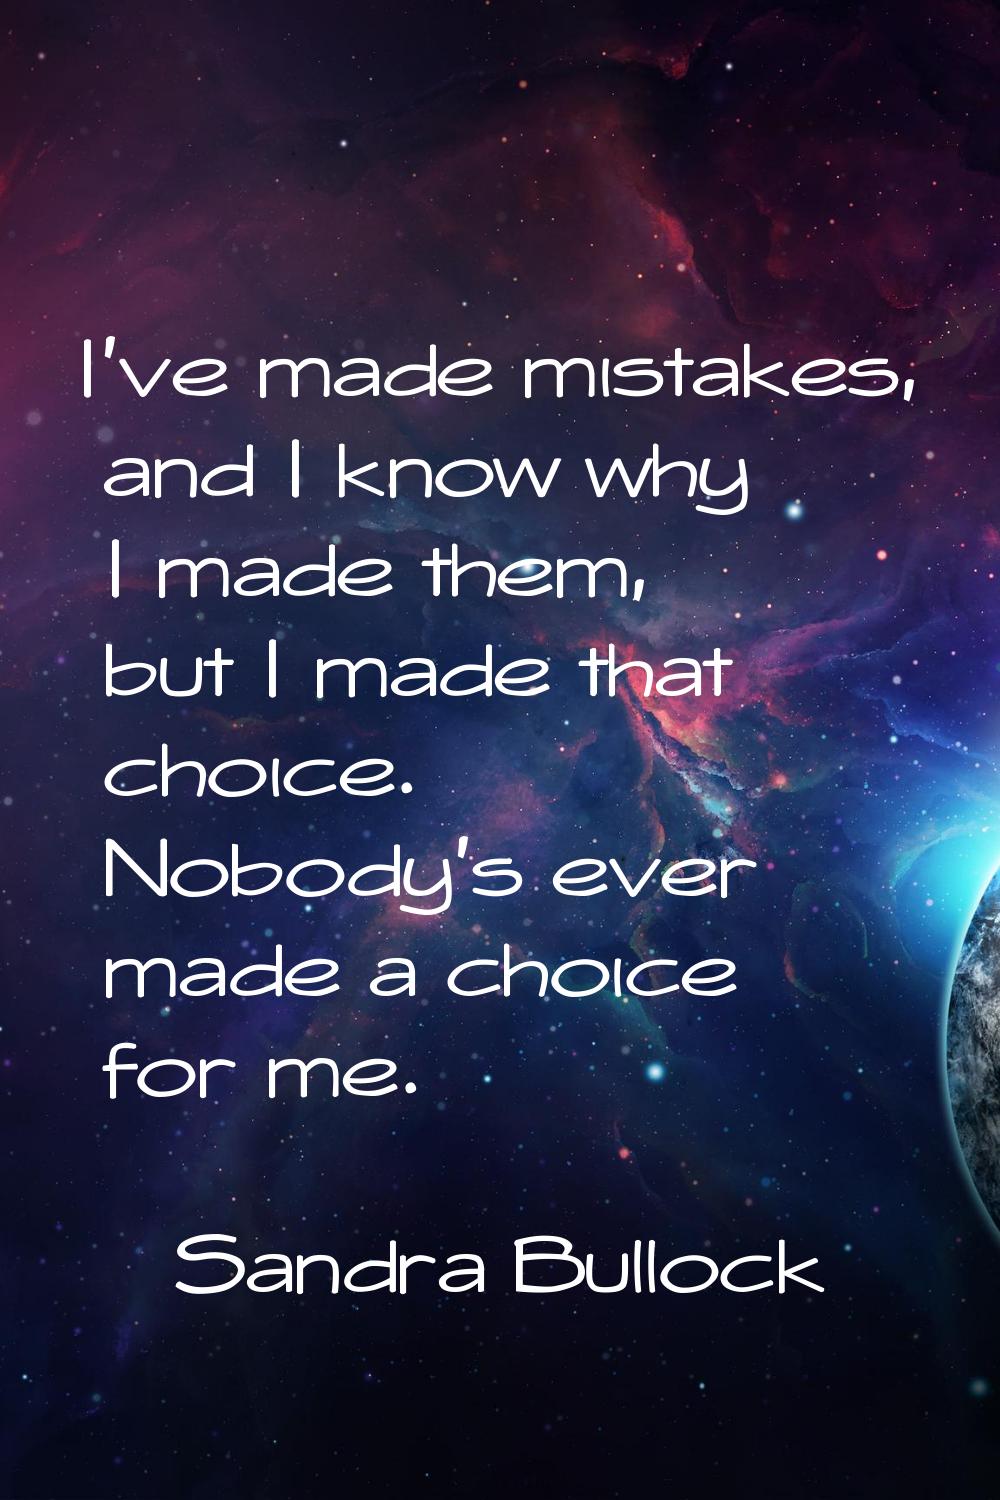 I've made mistakes, and I know why I made them, but I made that choice. Nobody's ever made a choice